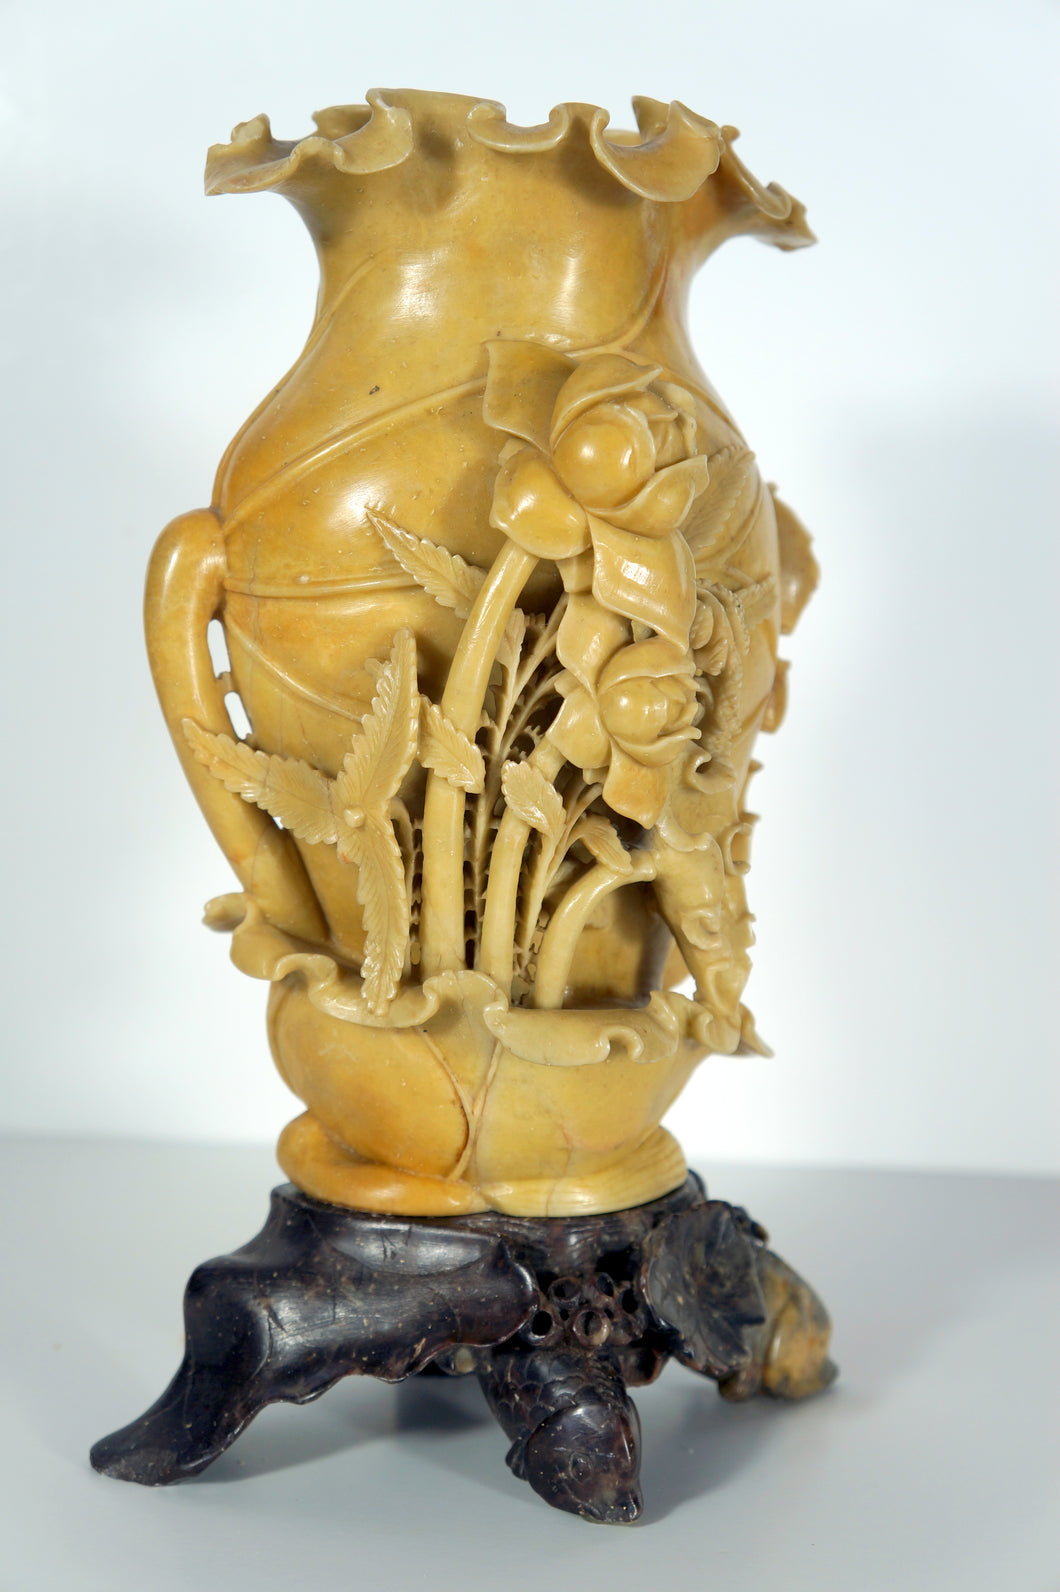 Soapstone Carving: Beautiful Carving of Lotuses on a Vase